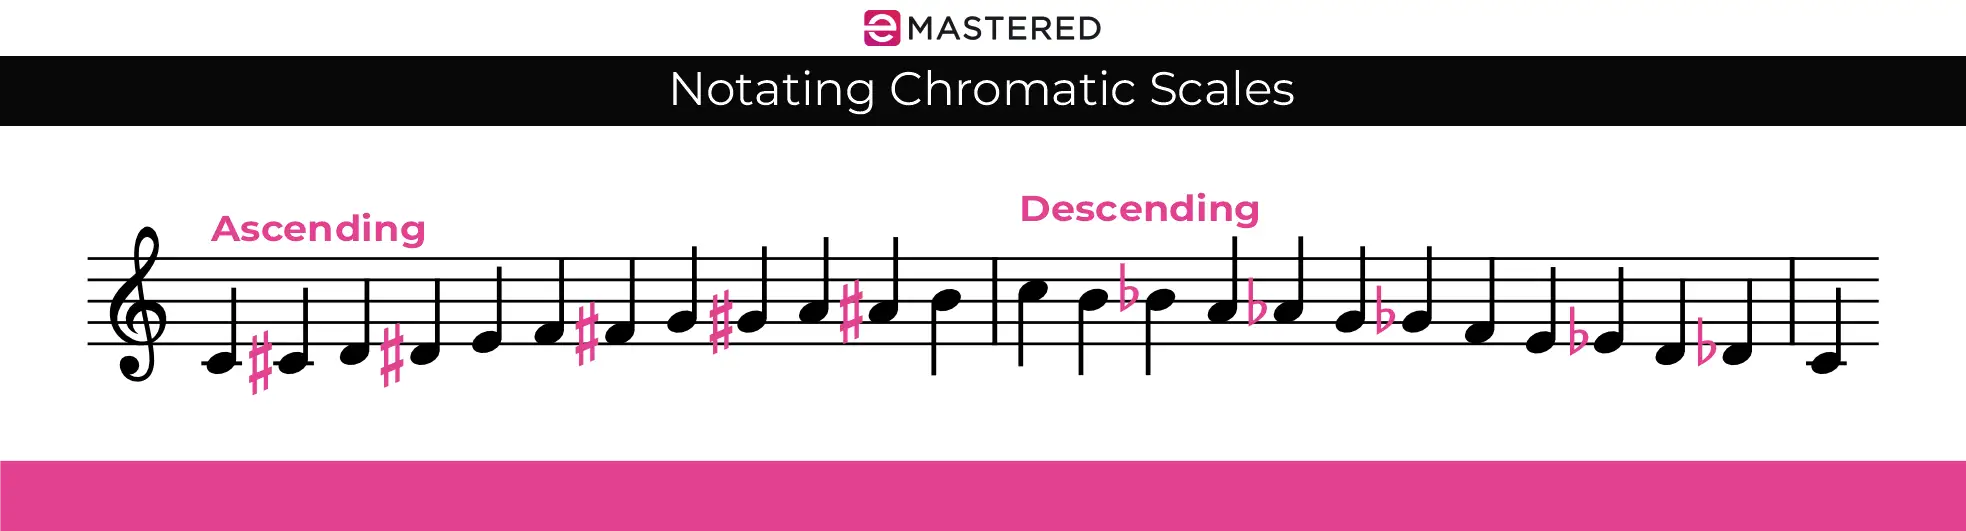 Notating Chromatic Scales